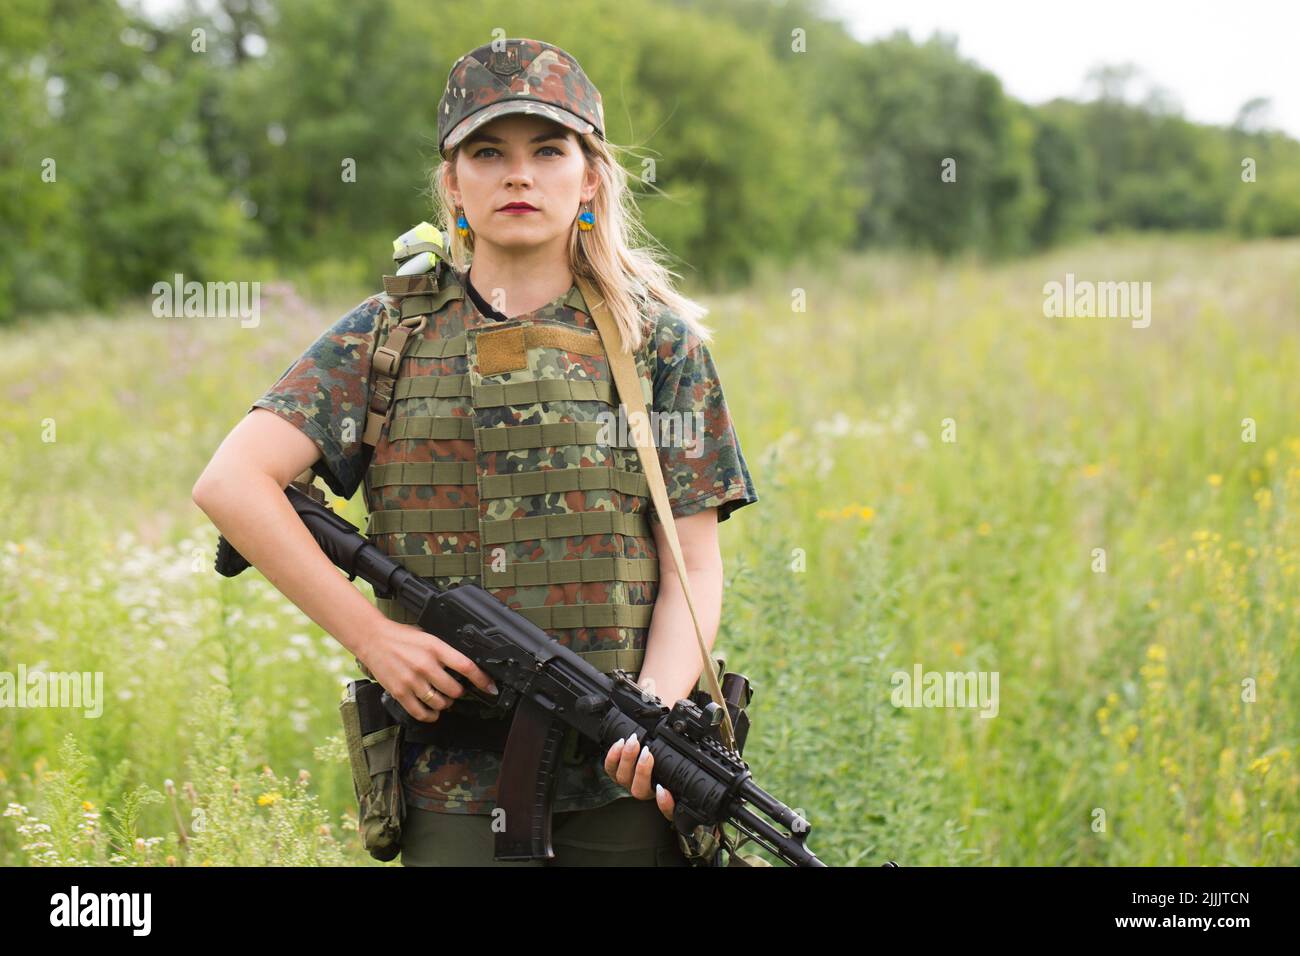 Ukrainian female military servicewoman with a machine gun in her hands in the middle of a field Stock Photo